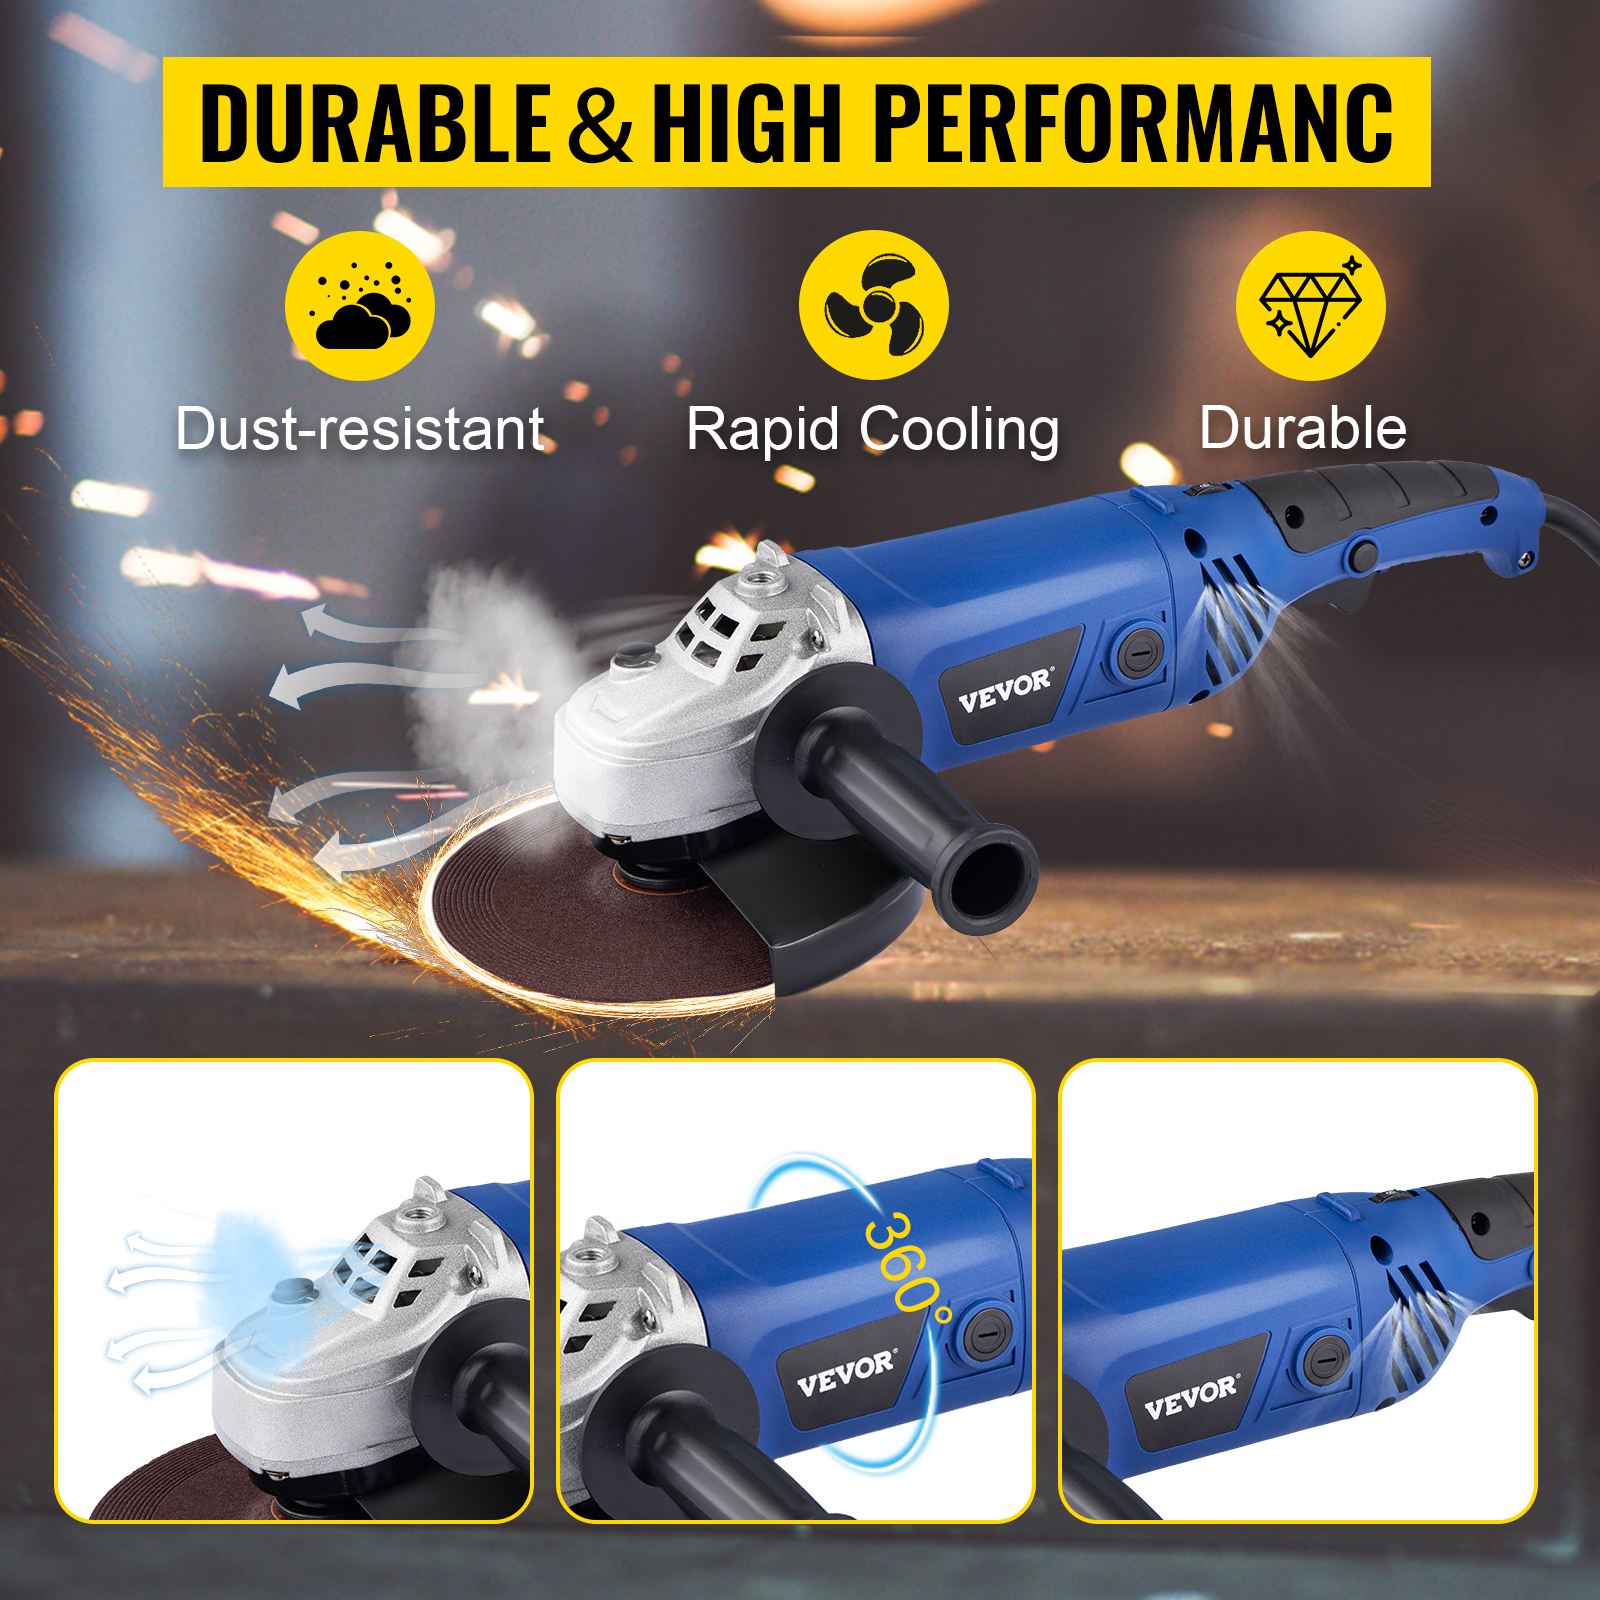 VEVOR Cordless Angle Grinder Kit, 4-1/2'' 9000rpm Brushless Motor, 3 Variable Speed, Electric Grinder Power Tools with 20V 4.0Ah Battery & Fast